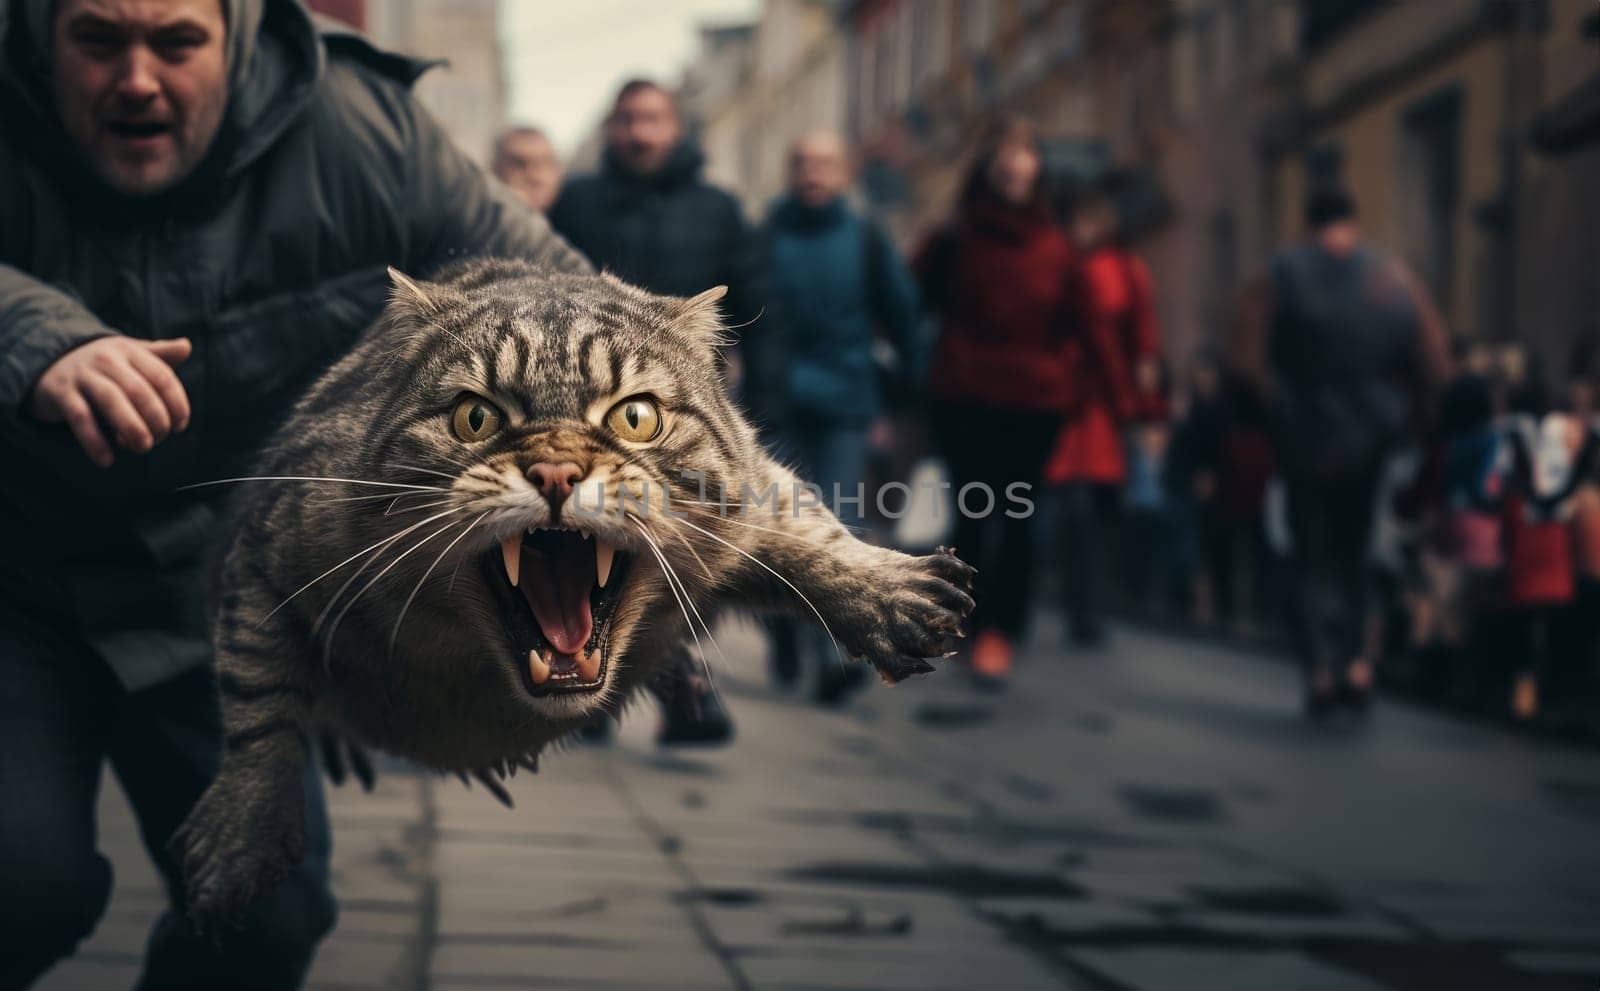 An aggressive cat on the loose in an urban environment poses a threat to both humans and animals